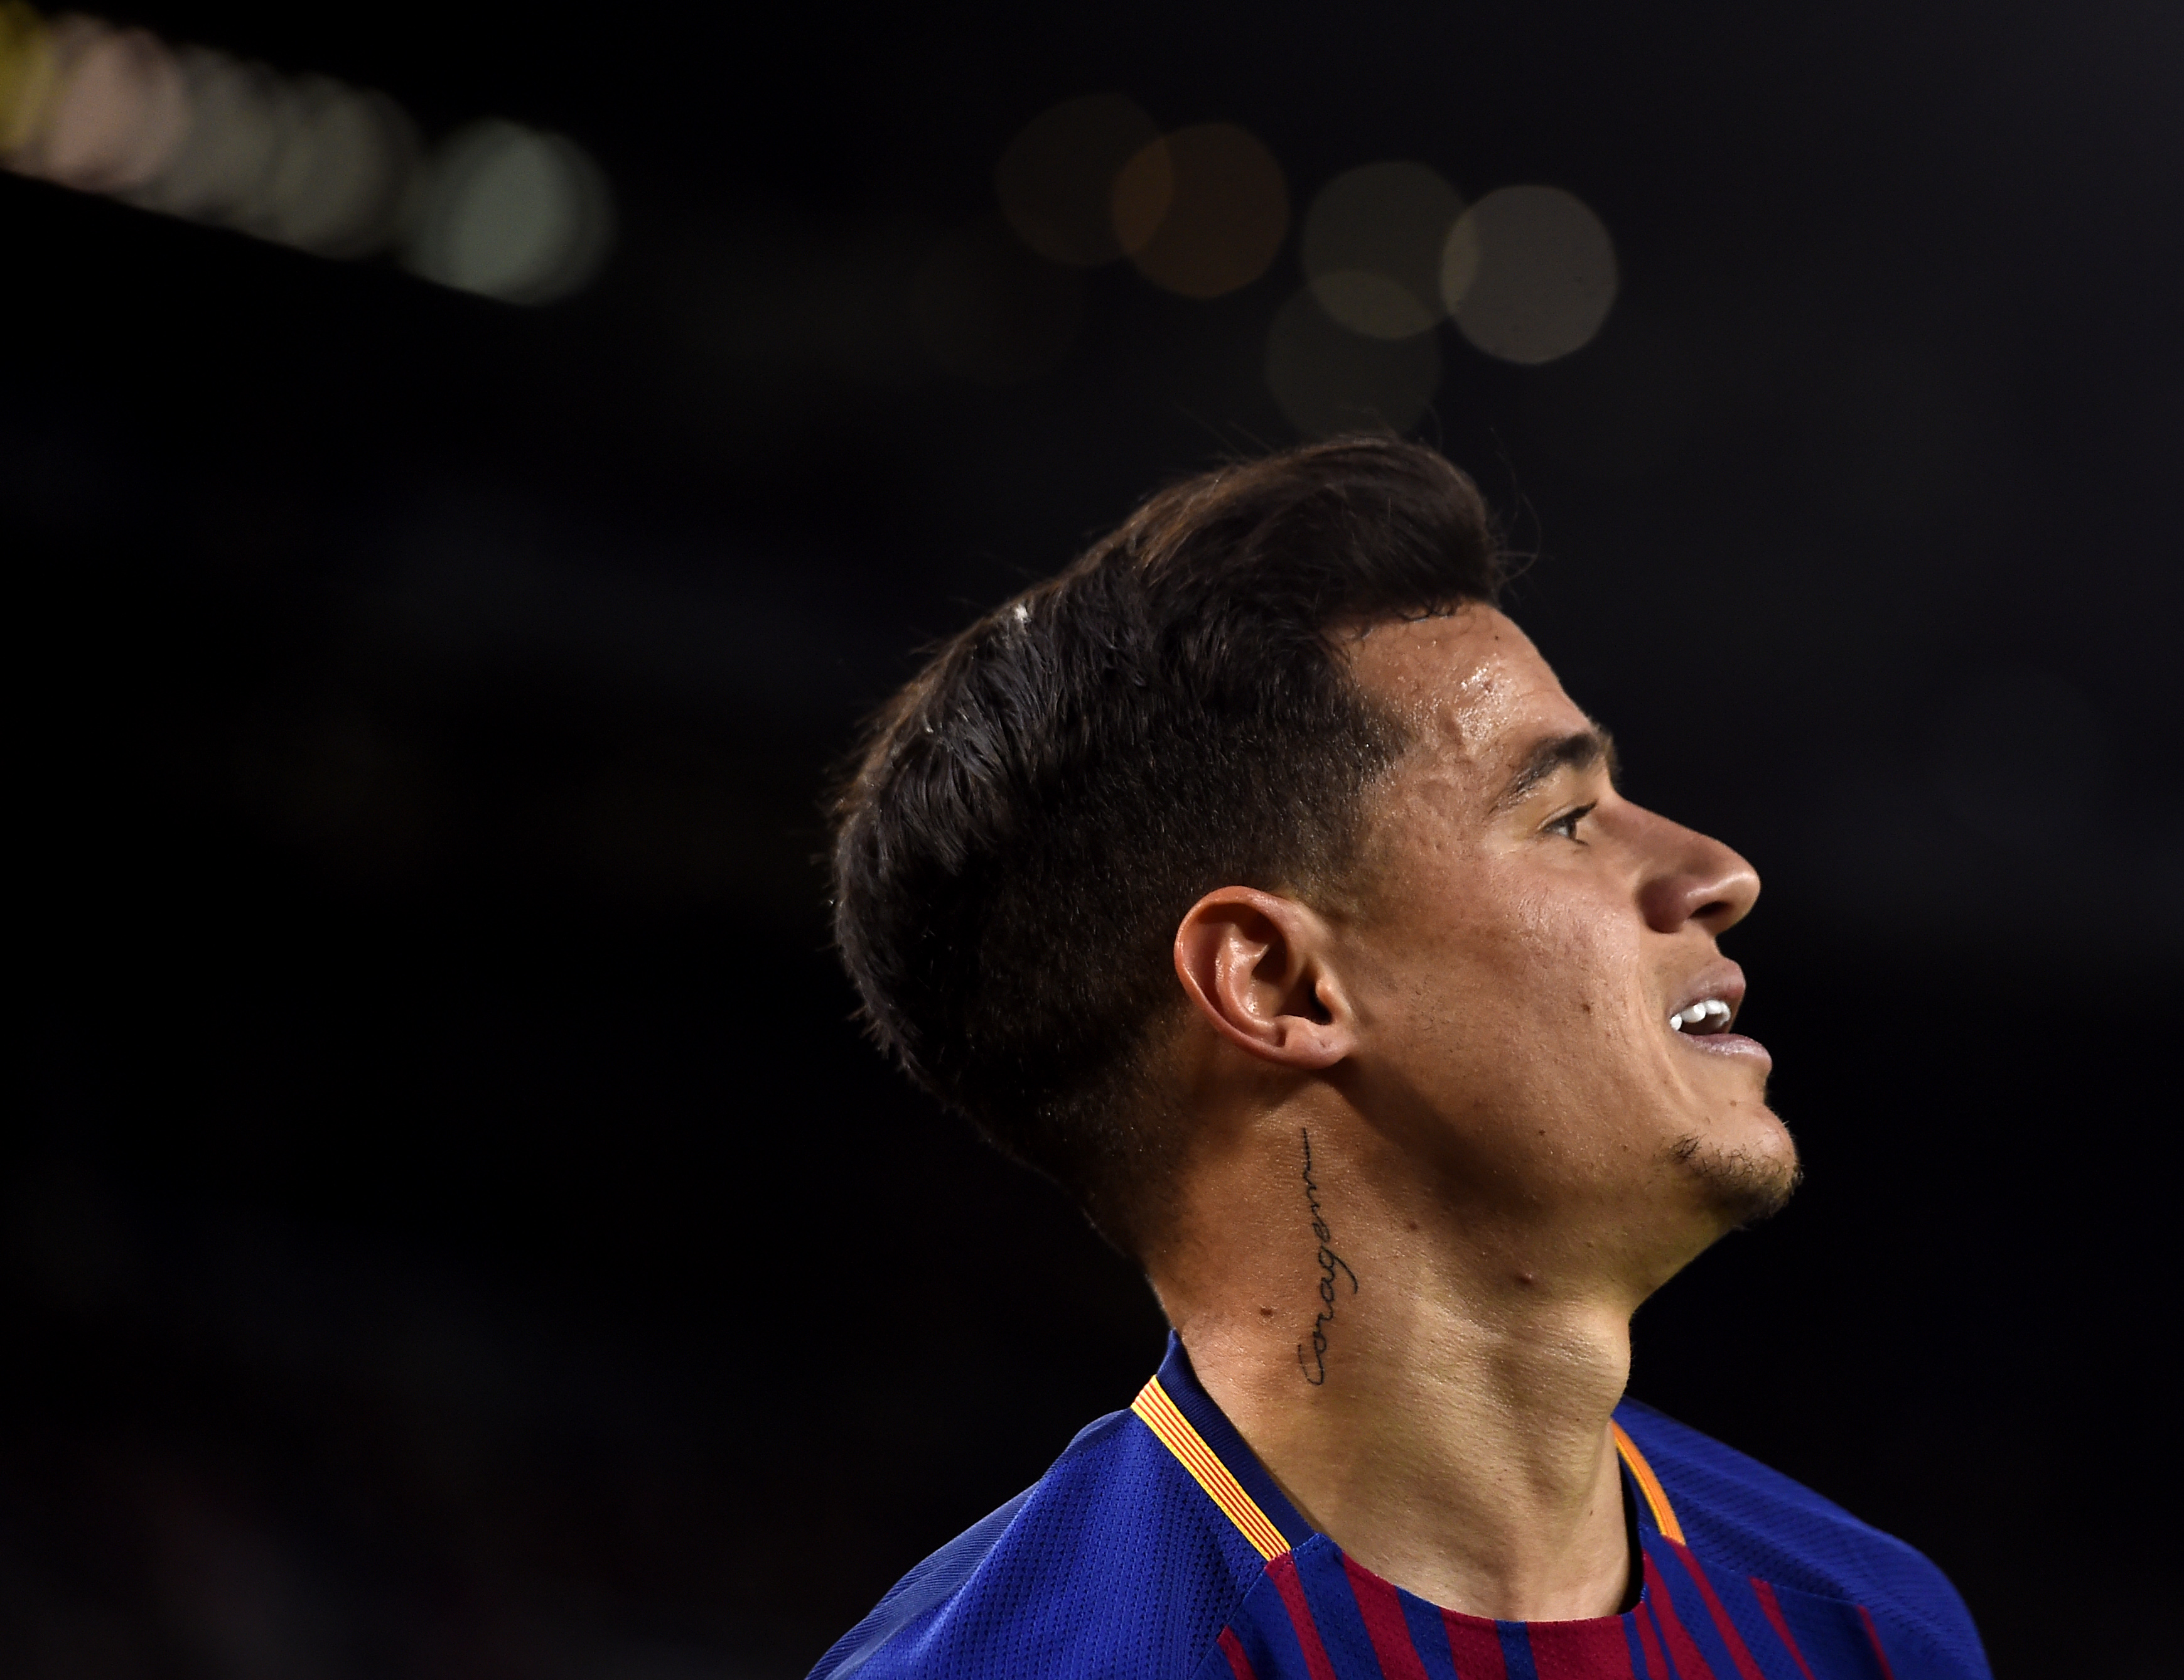 Barcelona's Brazilian midfielder Philippe Coutinho prepares for a corner kick during the Spanish league football match between FC Barcelona and Deportivo Alaves at the Camp Nou stadium in Barcelona on January 28, 2018. / AFP PHOTO / Josep LAGO        (Photo credit should read JOSEP LAGO/AFP/Getty Images)